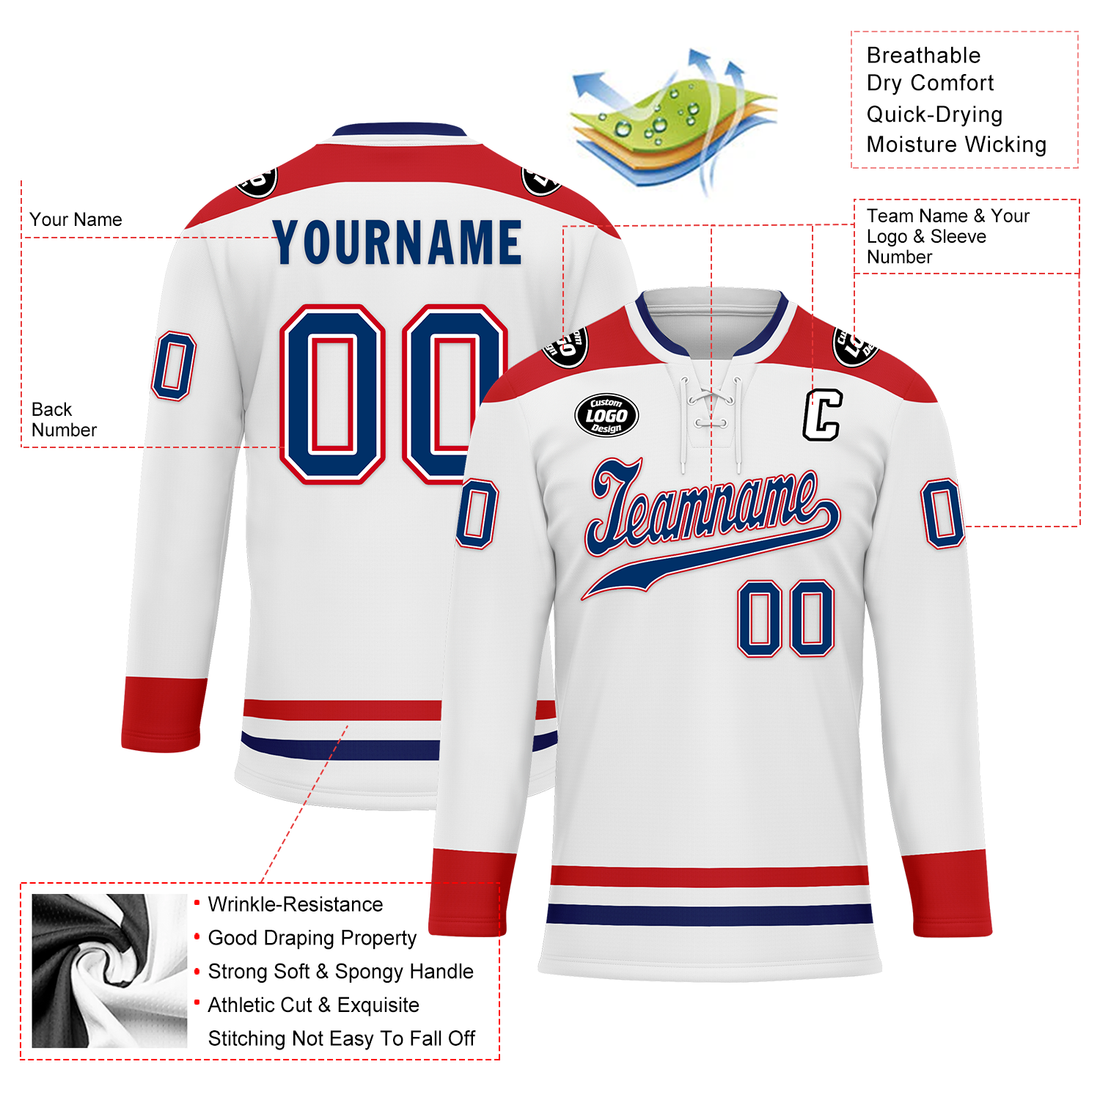 Custom White Red Personalized Hockey Jersey HCKJ01-D0a70a8